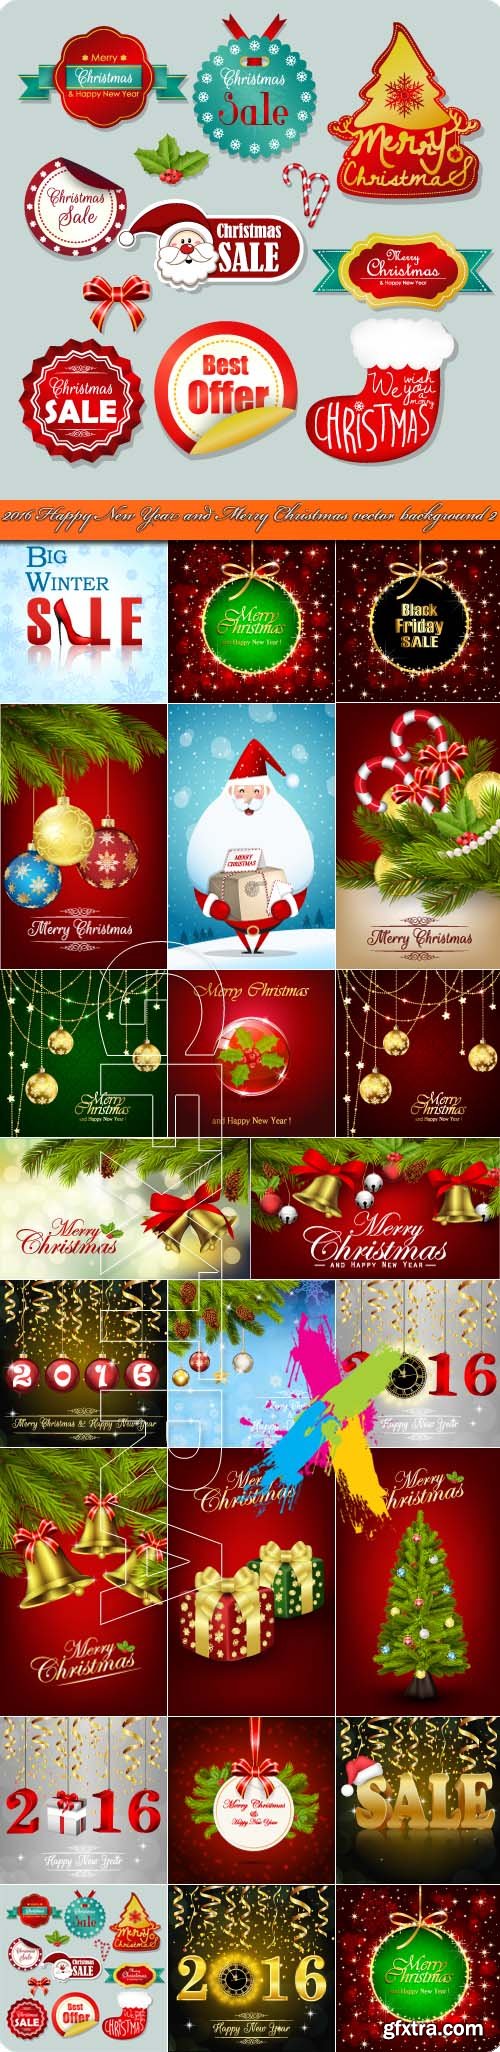 2016 Happy New Year and Merry Christmas vector background 2